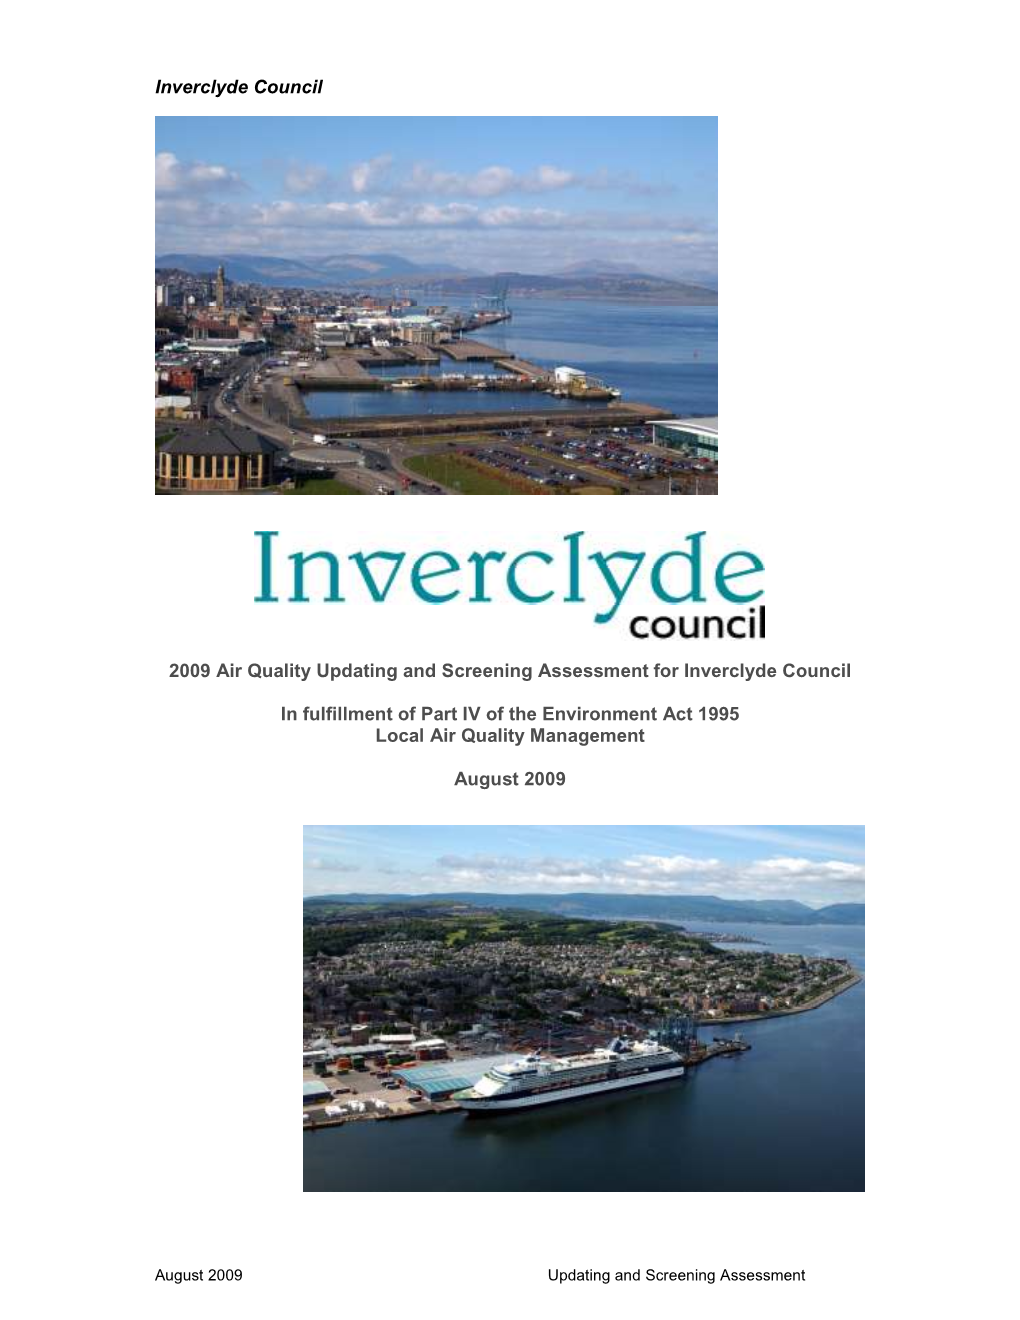 Inverclyde Council 2009 Air Quality Updating and Screening